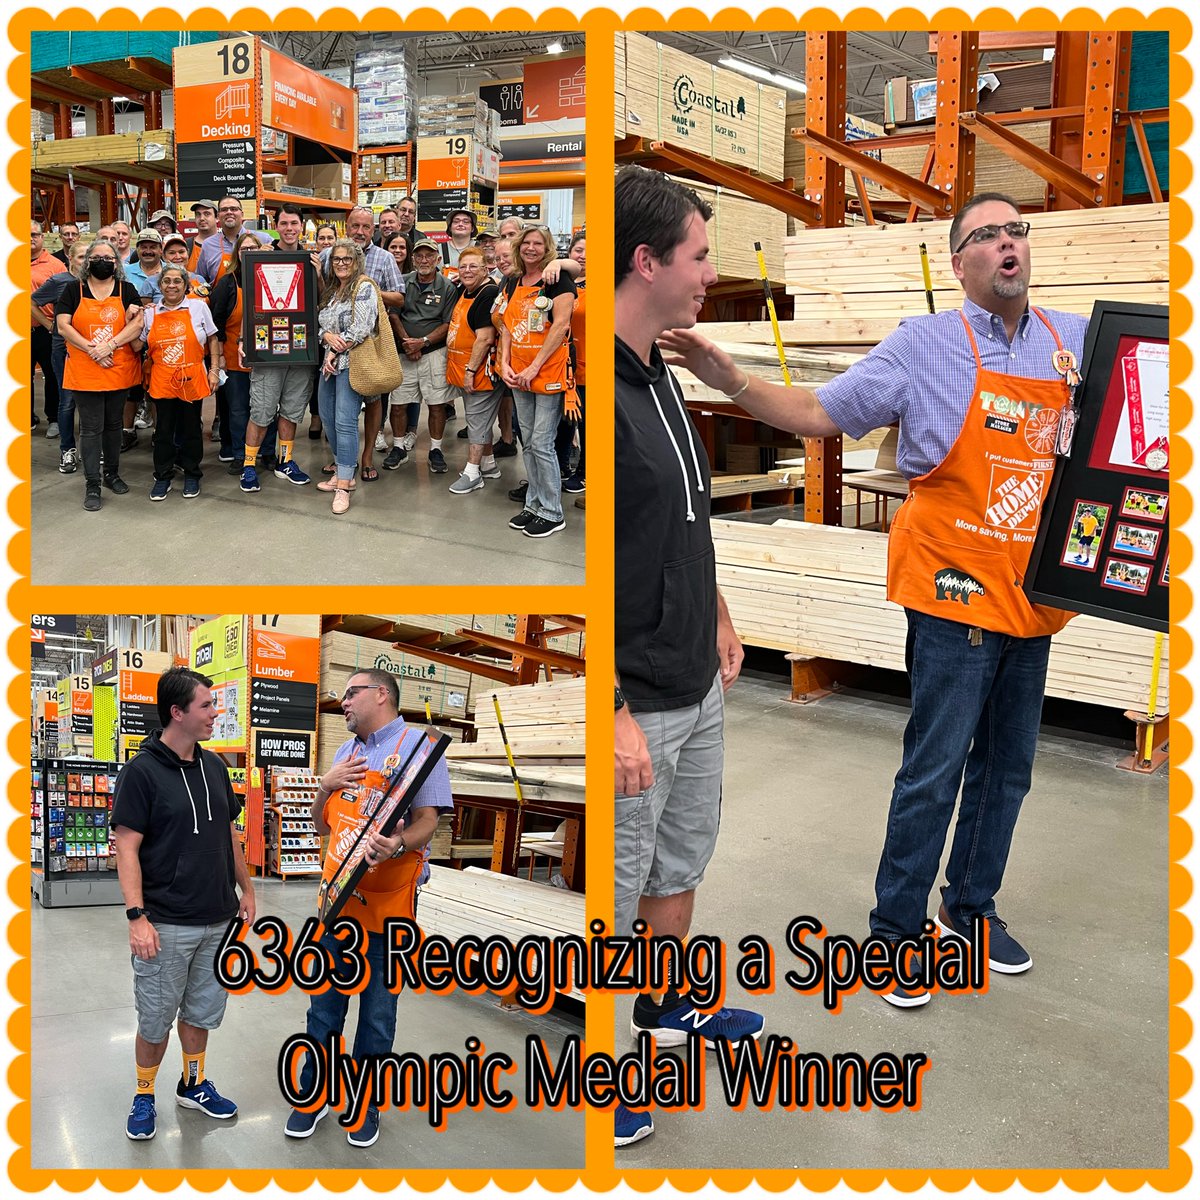 SHOUTOUT! 🚨 To our very own Colton, D94, associate being recognized by SM @tonyvillanueva & our entire store for participating in the Special Olympics & bringing home a 🥈 Silver Medal! @tonyvillanueva @RickGTHD @palmcoast6363